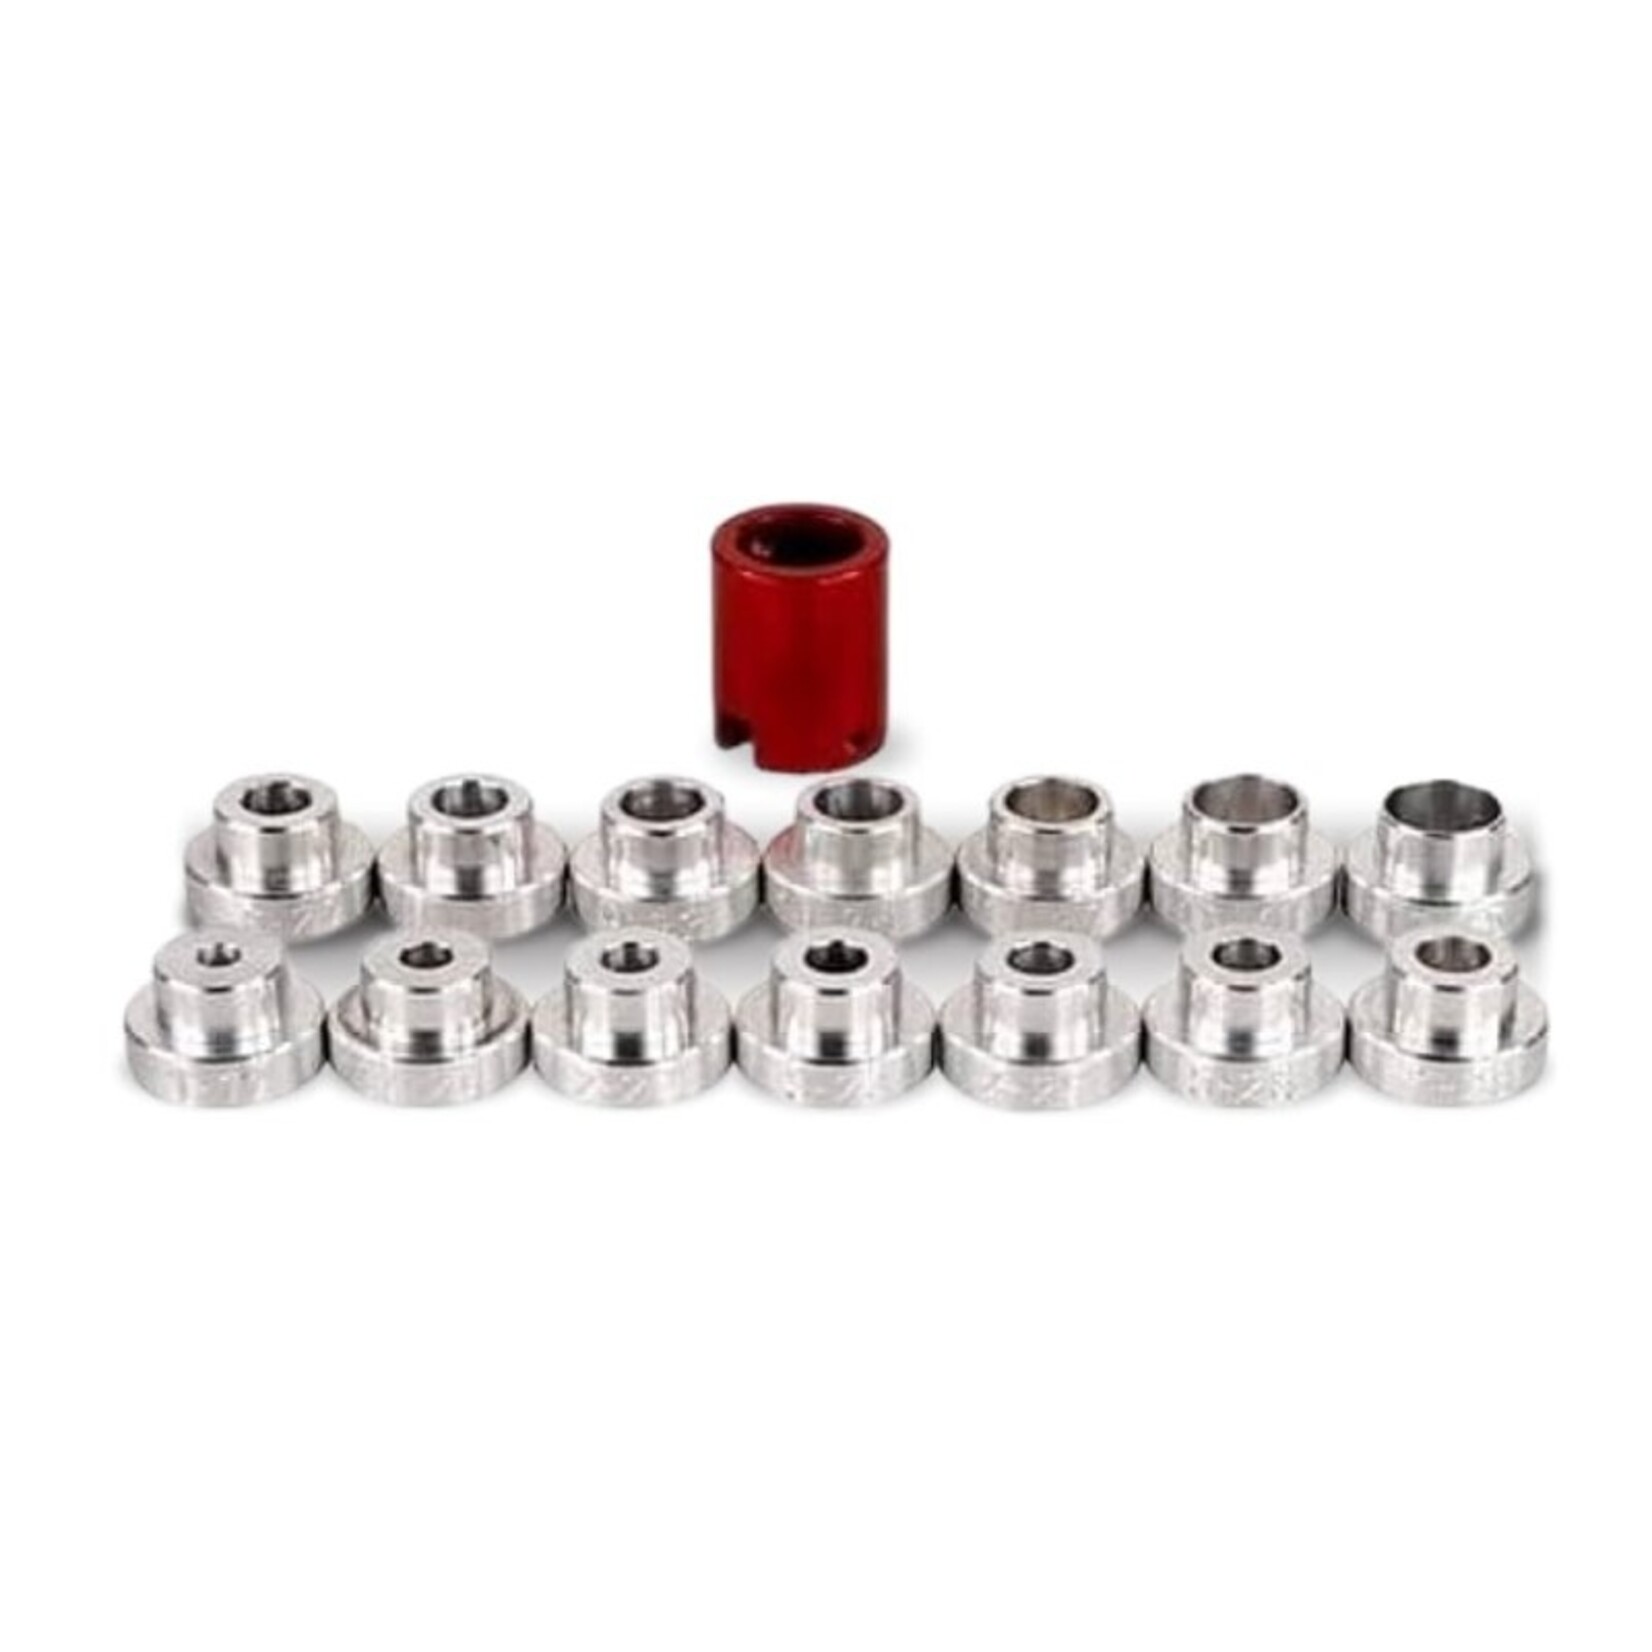 Hornady Hornady Lock-N-Load Bullet Comparator Set with 14 Inserts